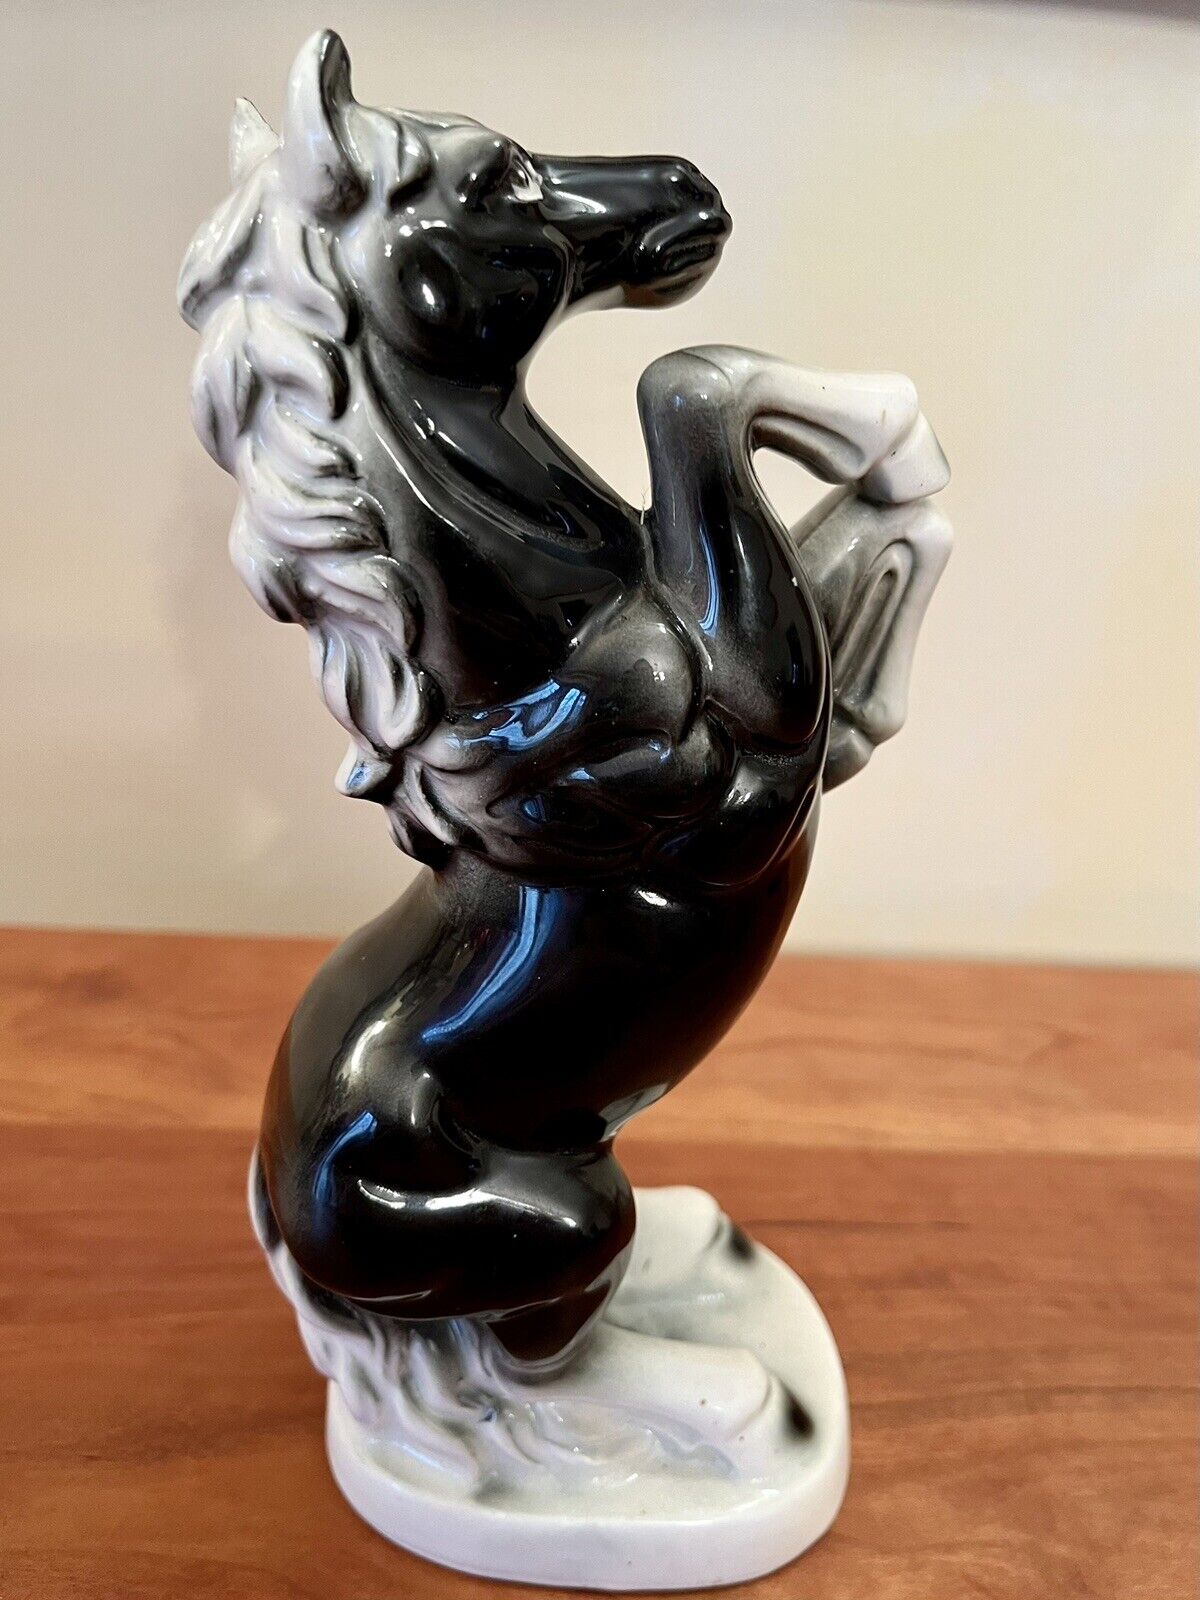 Vintage Black Ceramic Rearing Stallion Mfg. by Pacifica Japan; 8” Tall